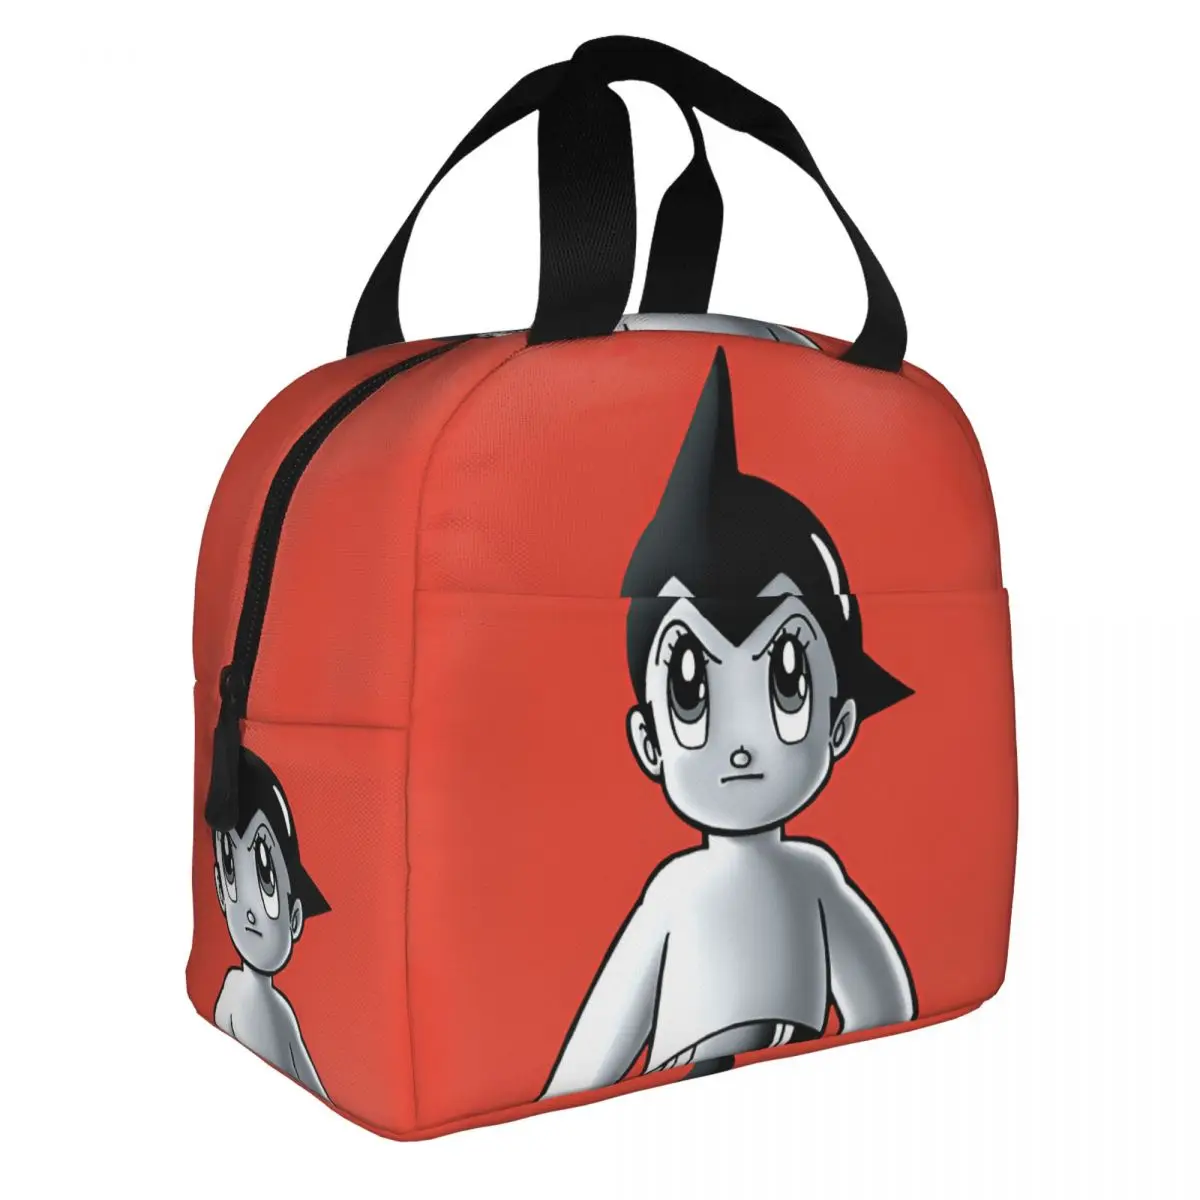 Astro Boy Lunch Bento Bags Portable Aluminum Foil thickened Thermal Insulation Oxford Cloth Lunch Bag for Women Men Boy